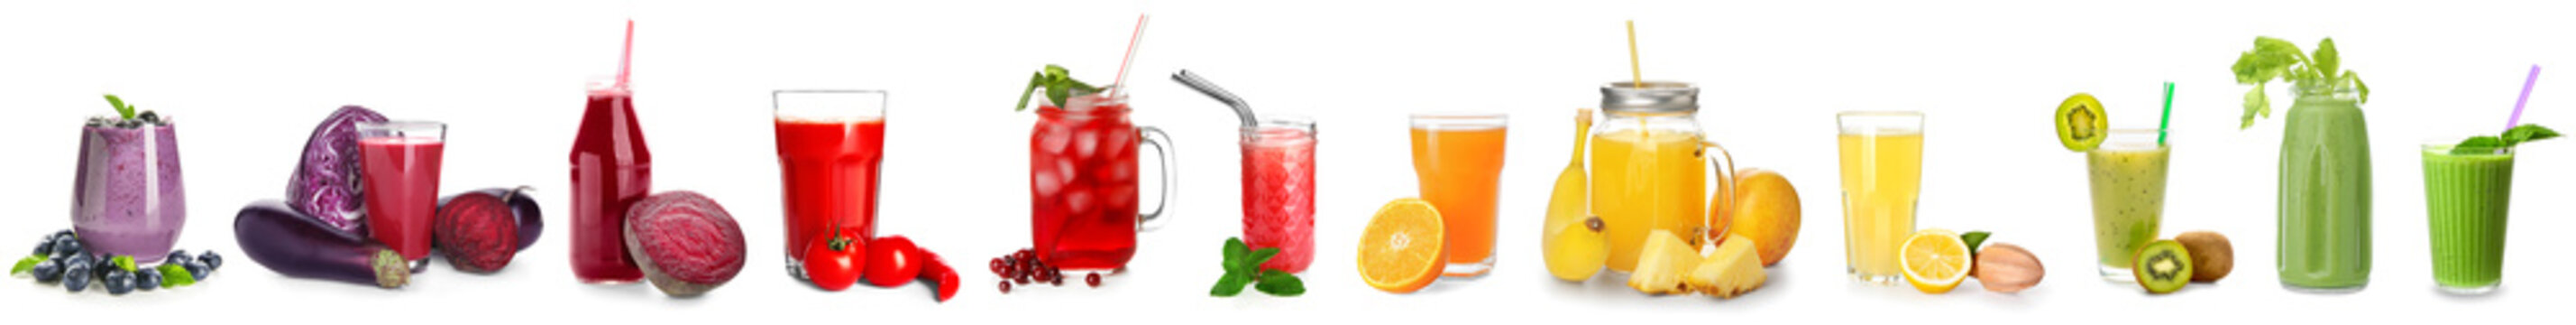 Set of healthy colorful juices on white background